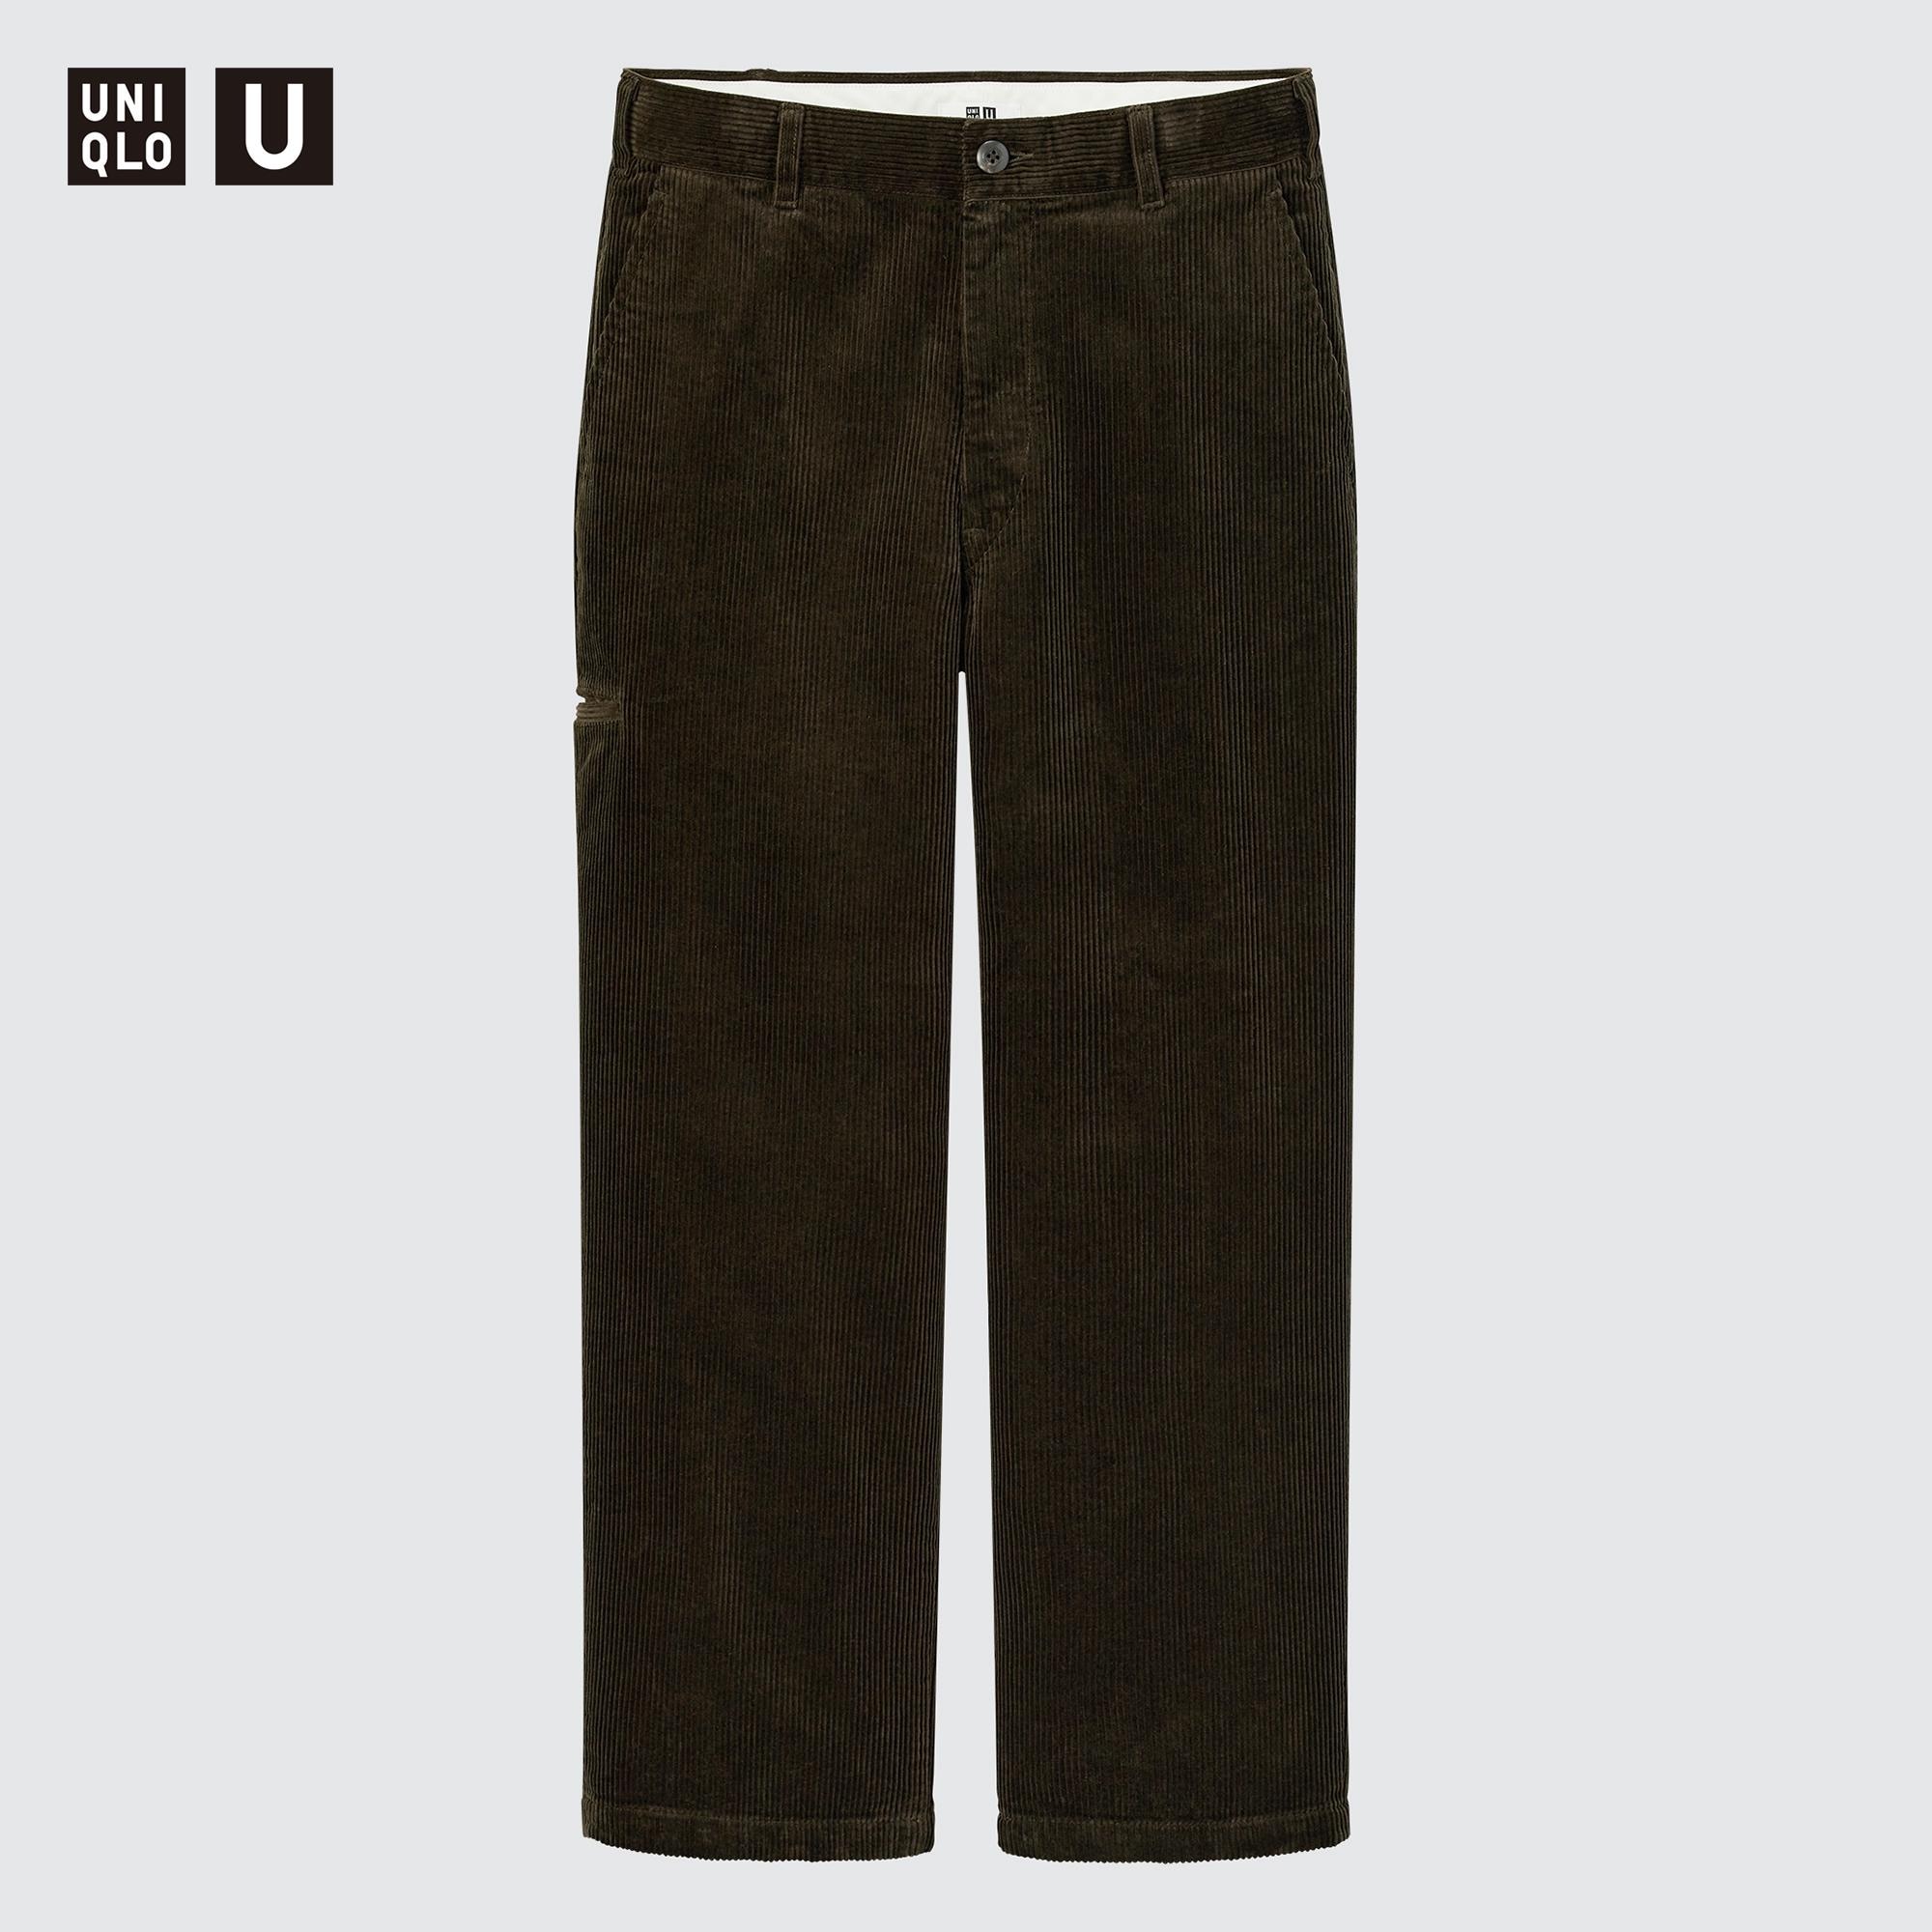 Heavyweight Corduroy Trousers  Olive  Mens Corduroy Trousers  Oliver  Brown London